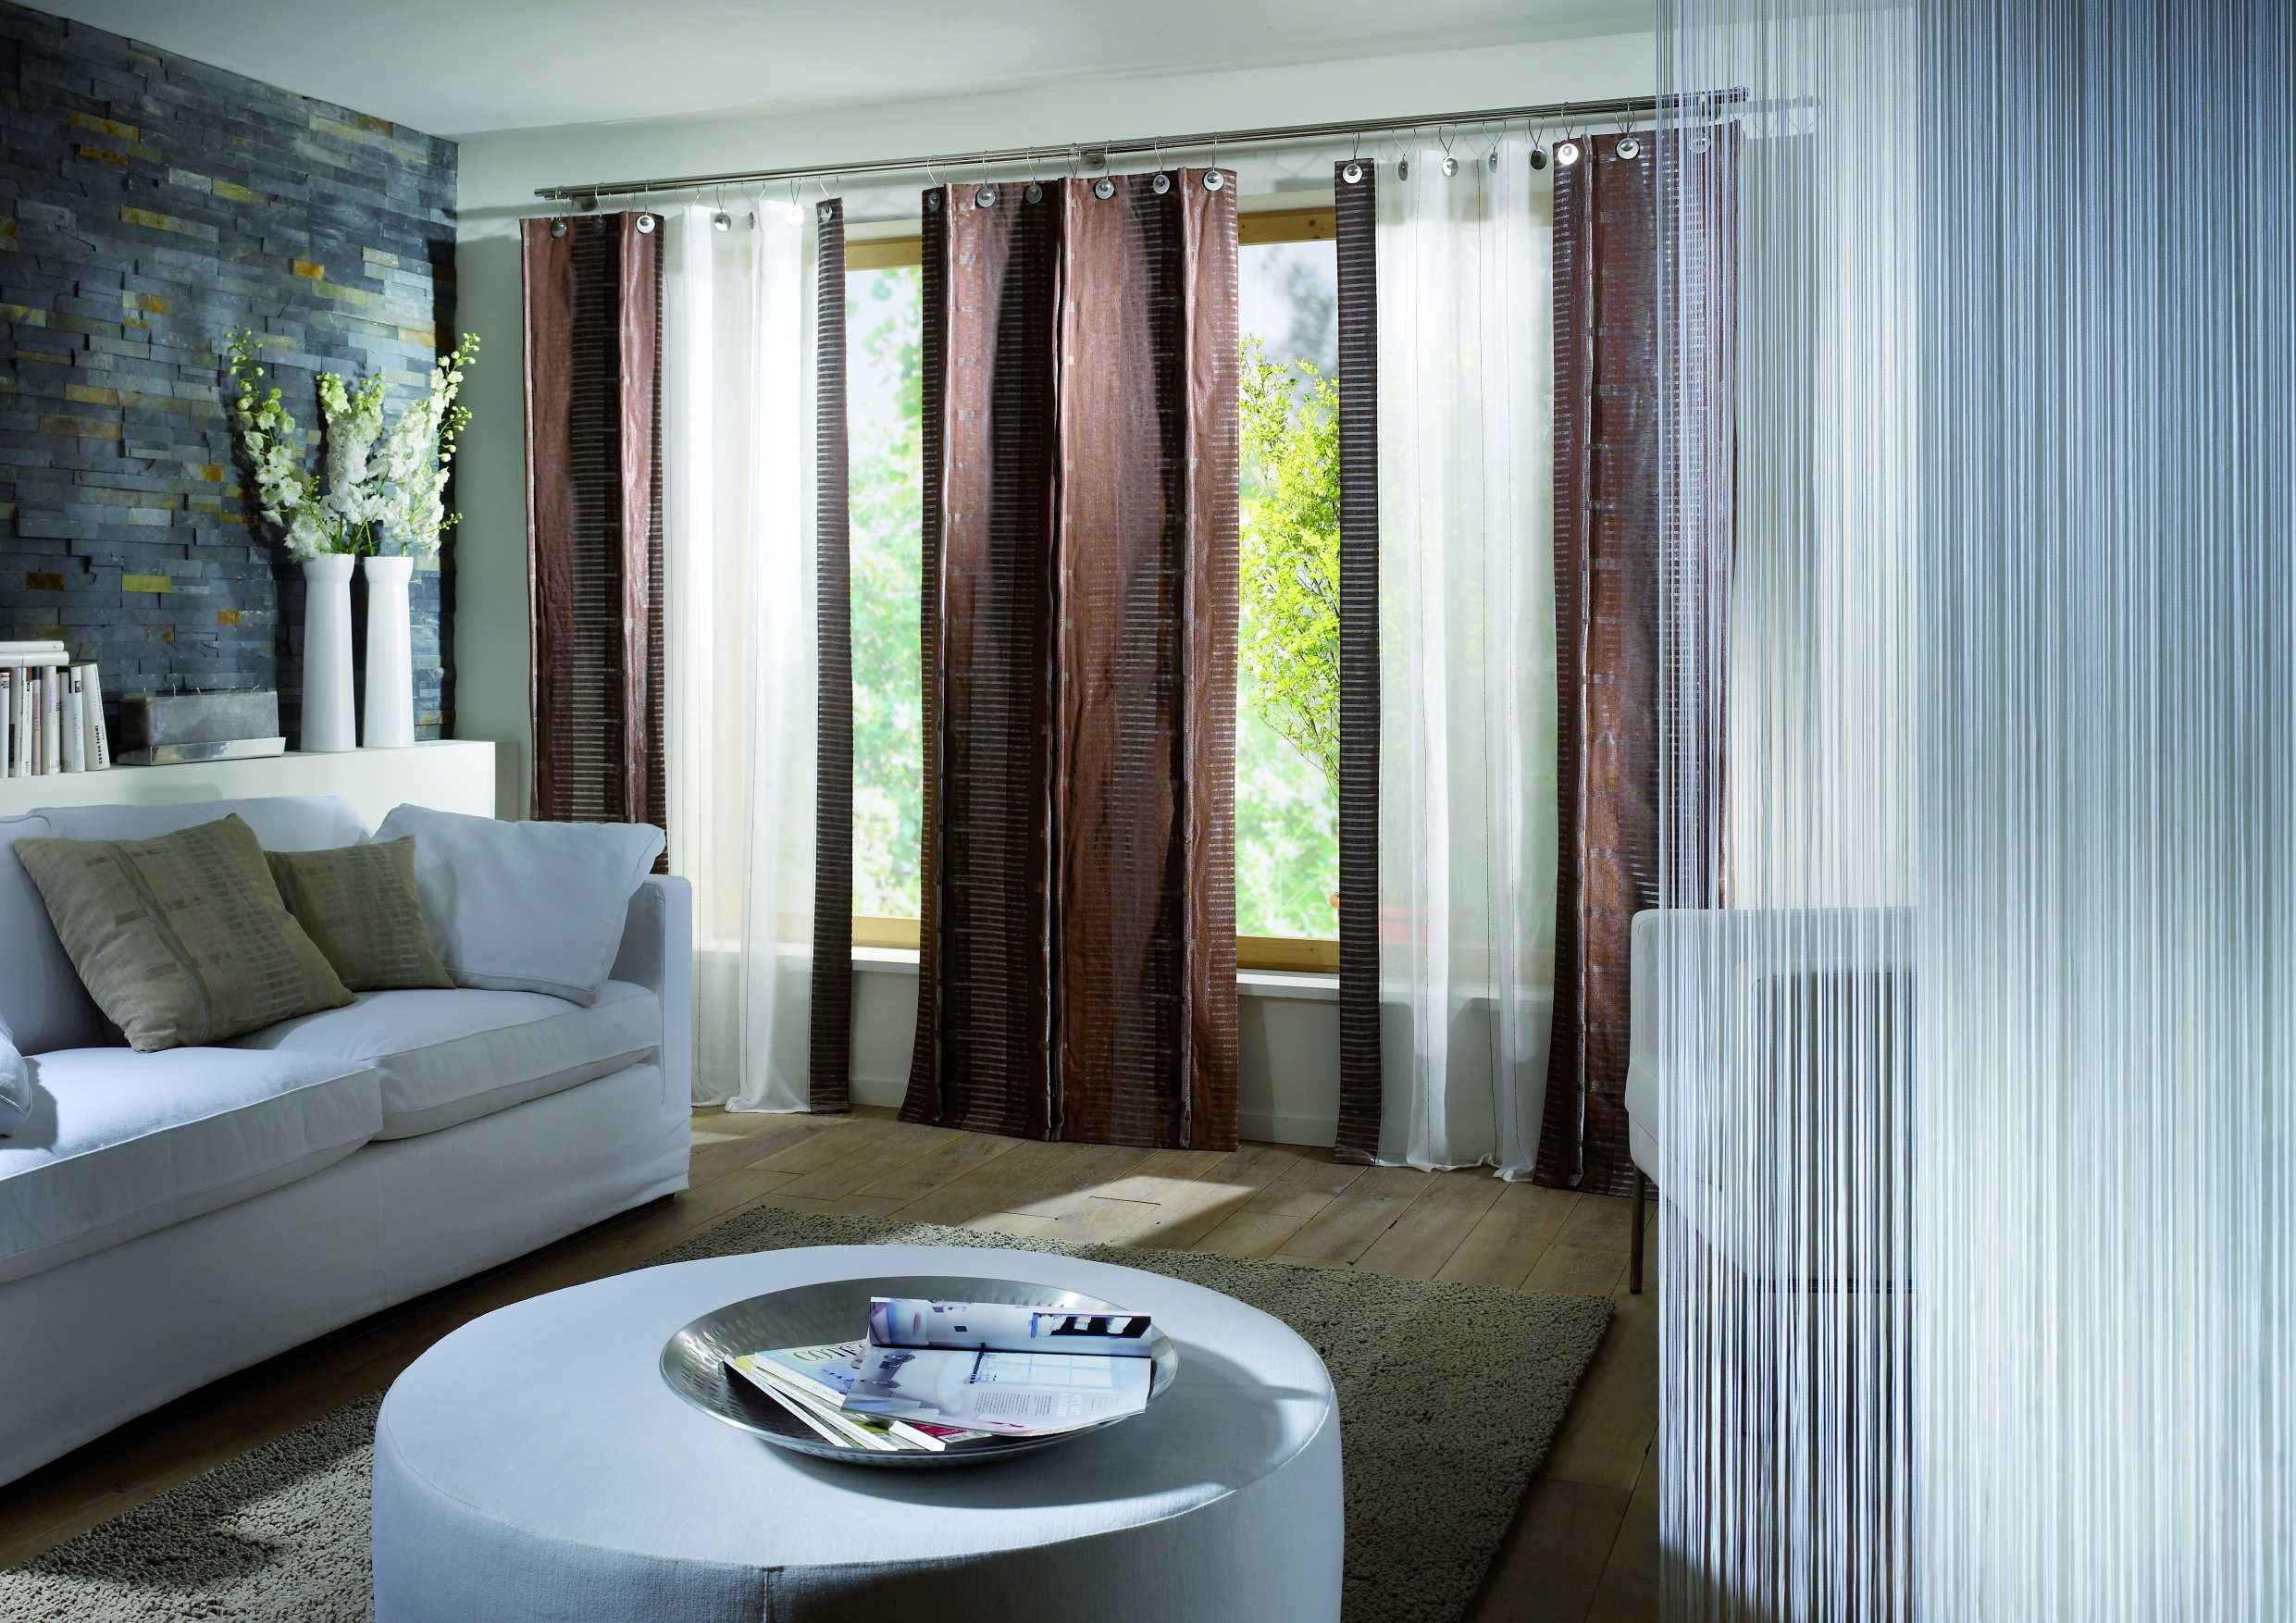 Living Room Drapes Ideas
 Living Room Curtain Ideas to Perfect Living Room Interior